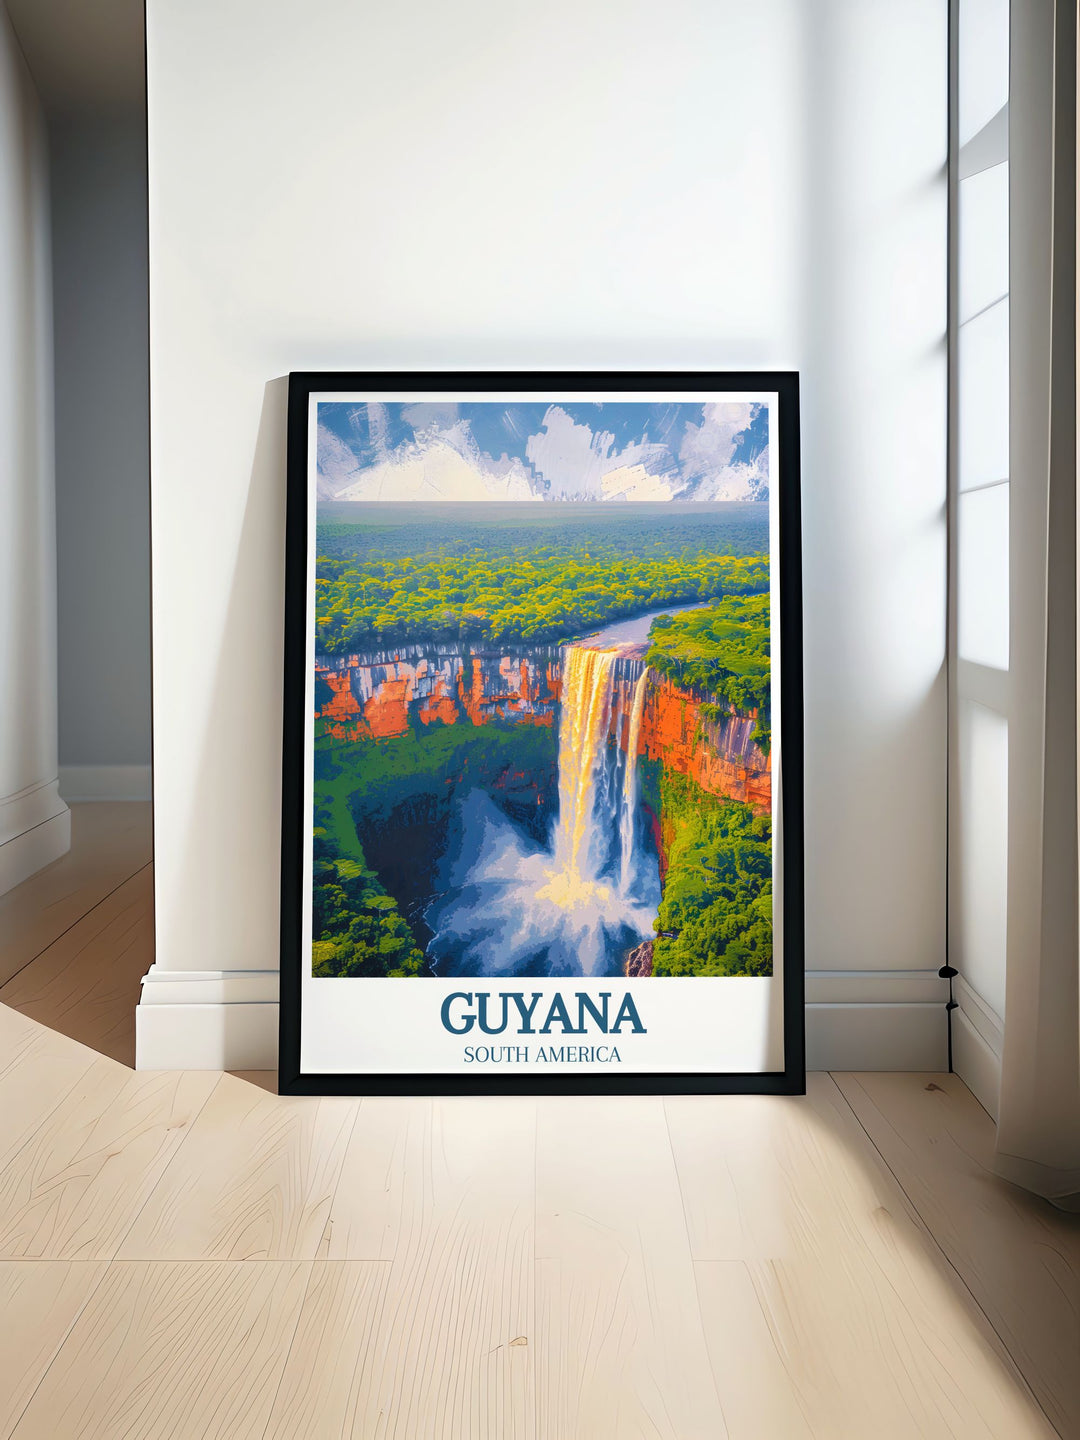 This travel poster features the vibrant rainforests and serene rivers of Guyana, offering a picturesque view of the countrys untouched natural beauty, perfect for enhancing any room.